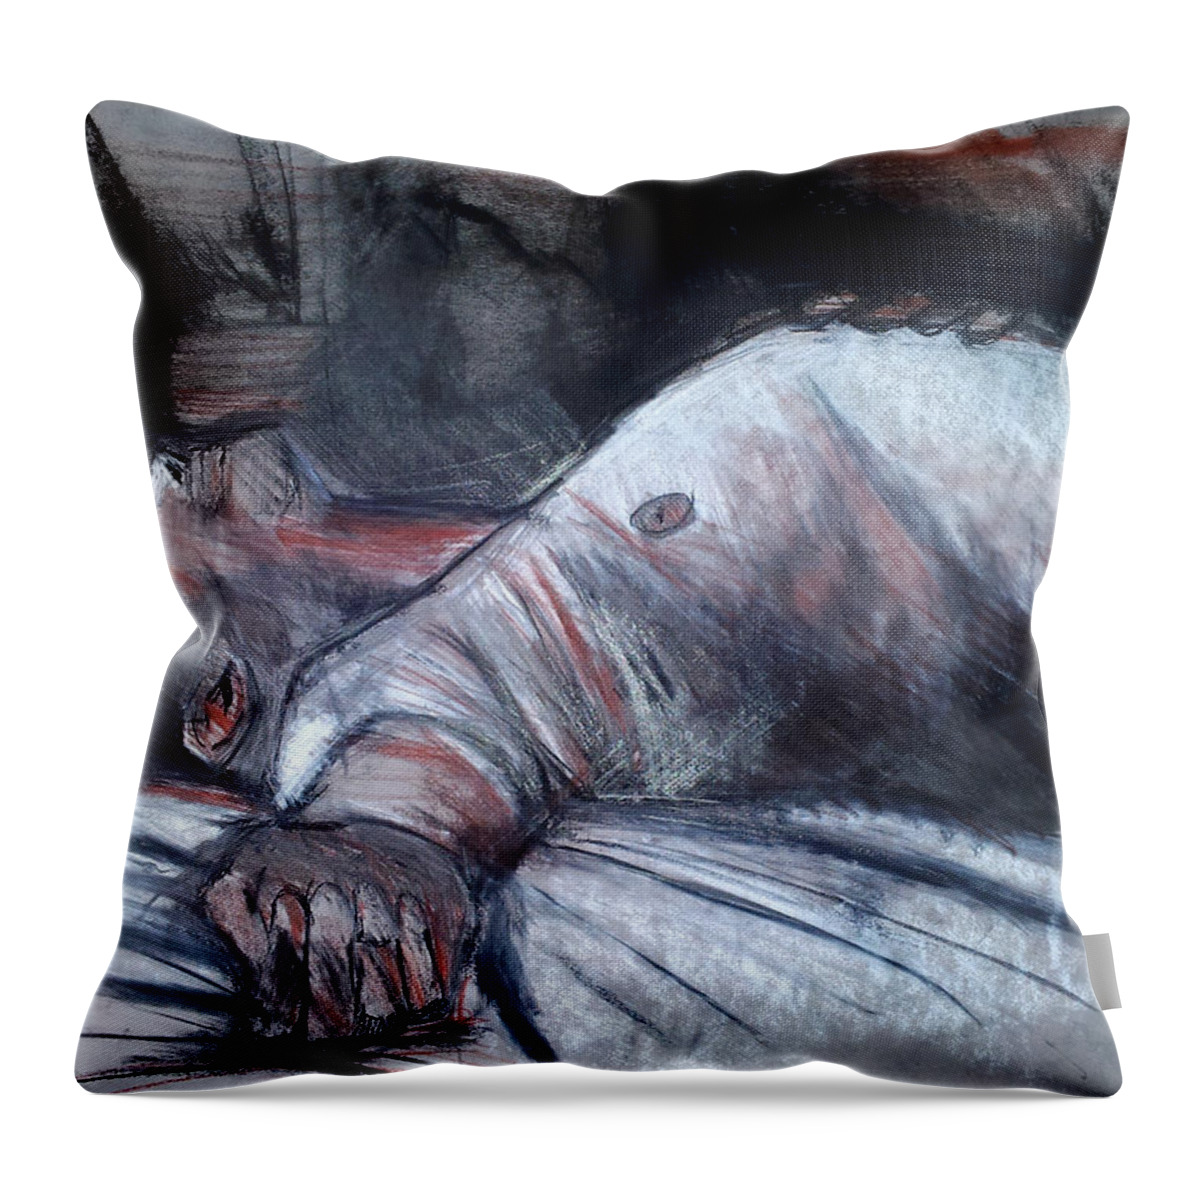  Throw Pillow featuring the drawing Sleep by John Gholson